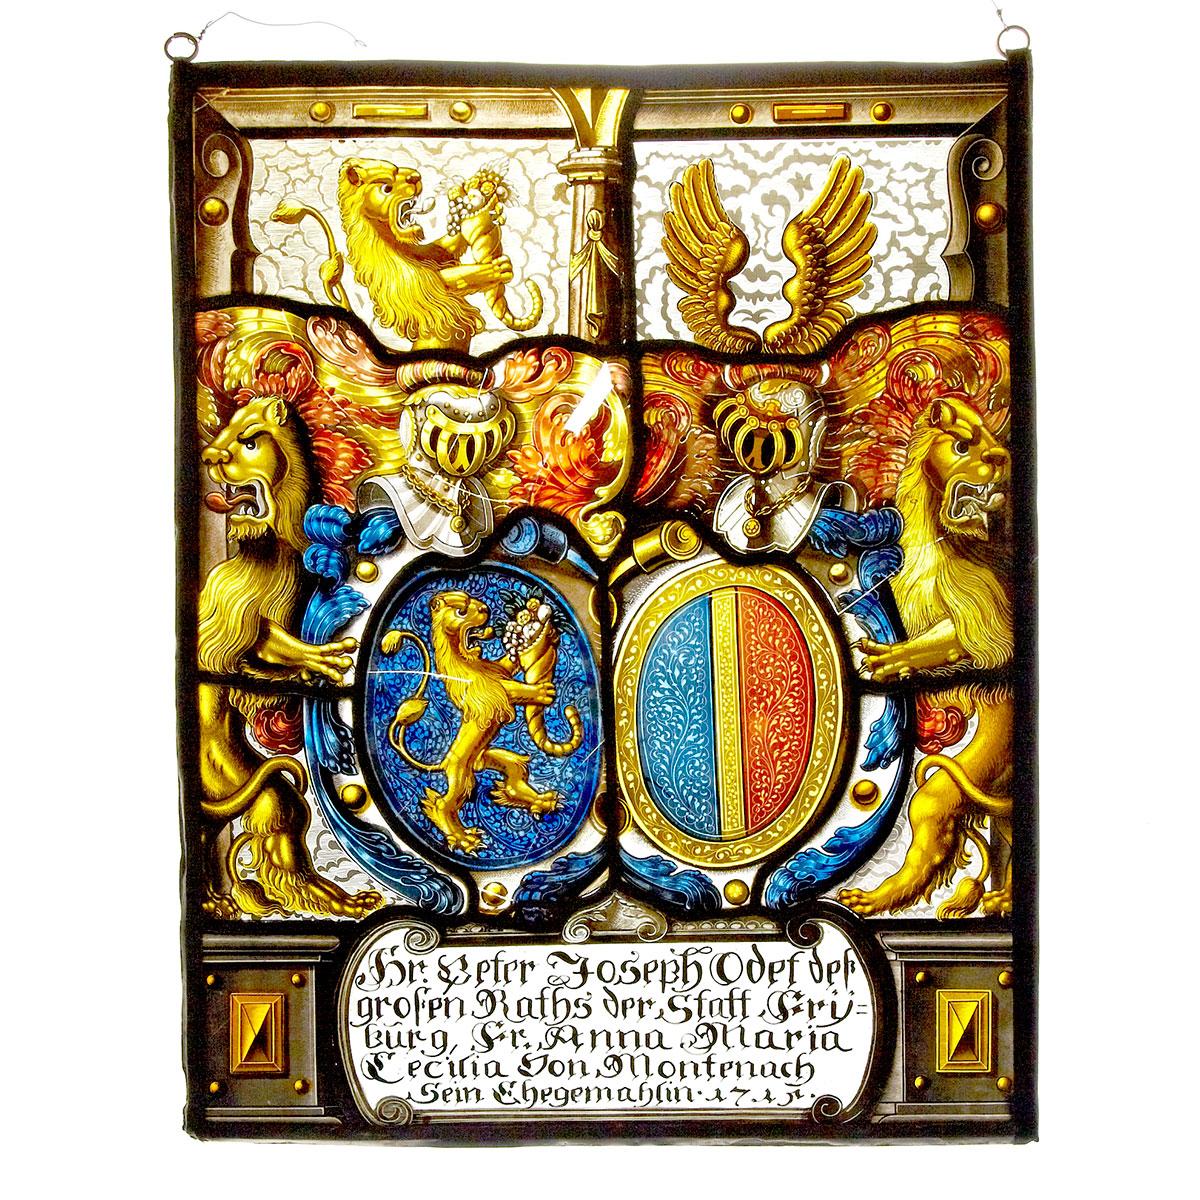 Swiss Heraldic Stained Glass Panel, Fribourg, 1715 